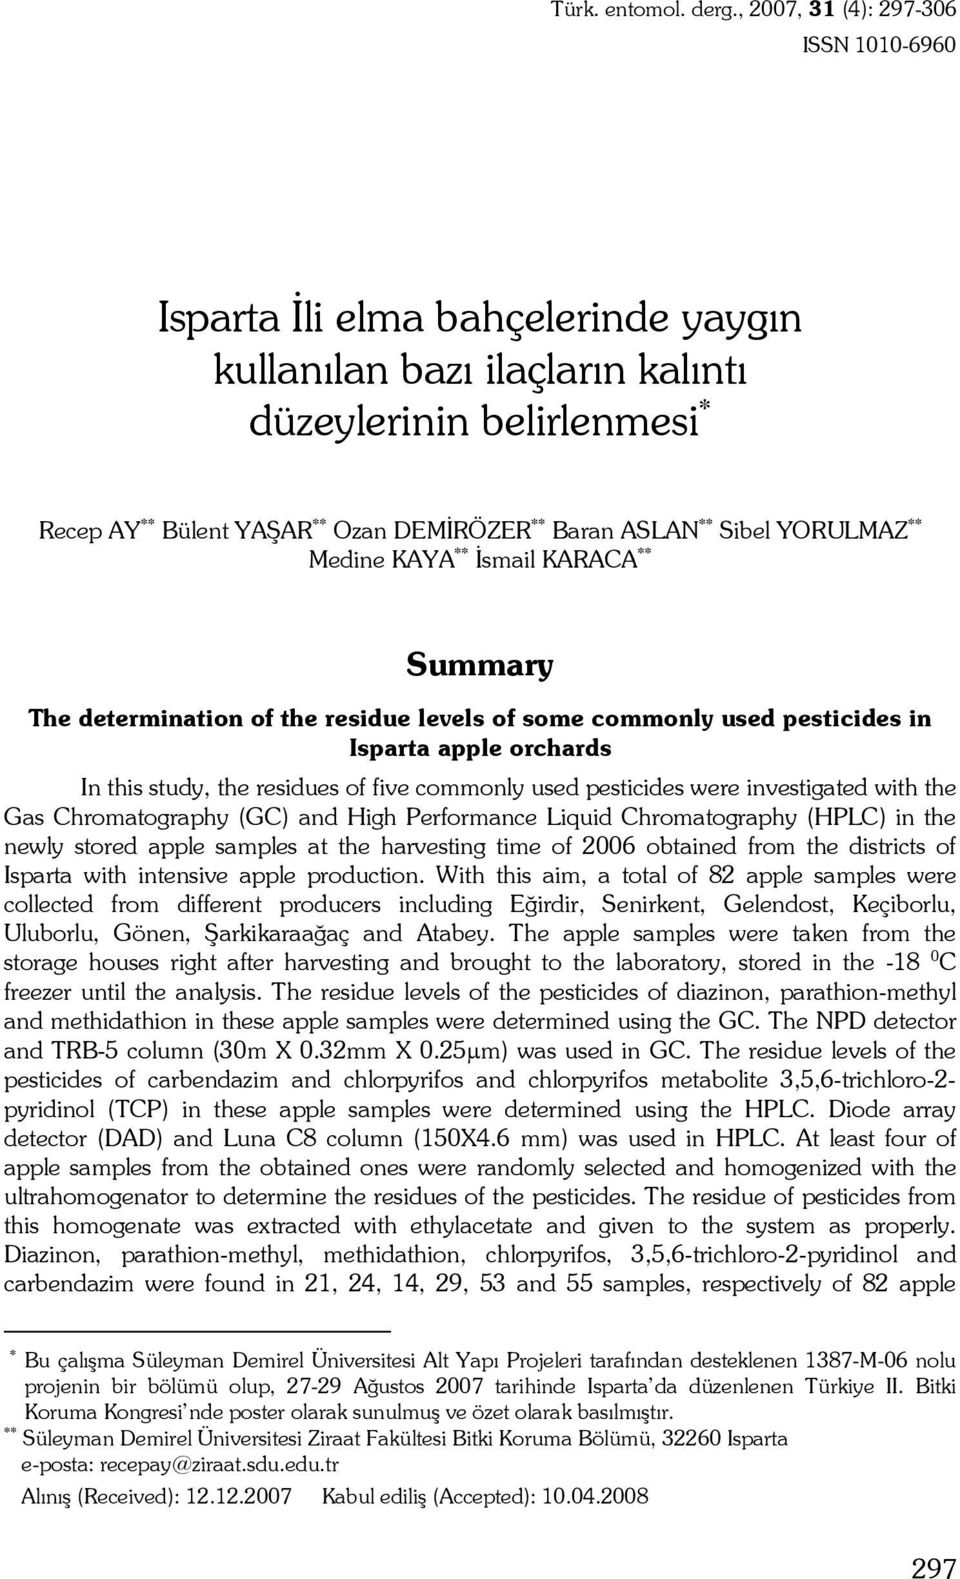 Sibel YORULMAZ ** Medine KAYA ** İsmail KARACA ** Summary The determination of the residue levels of some commonly used pesticides in Isparta apple orchards In this study, the residues of five